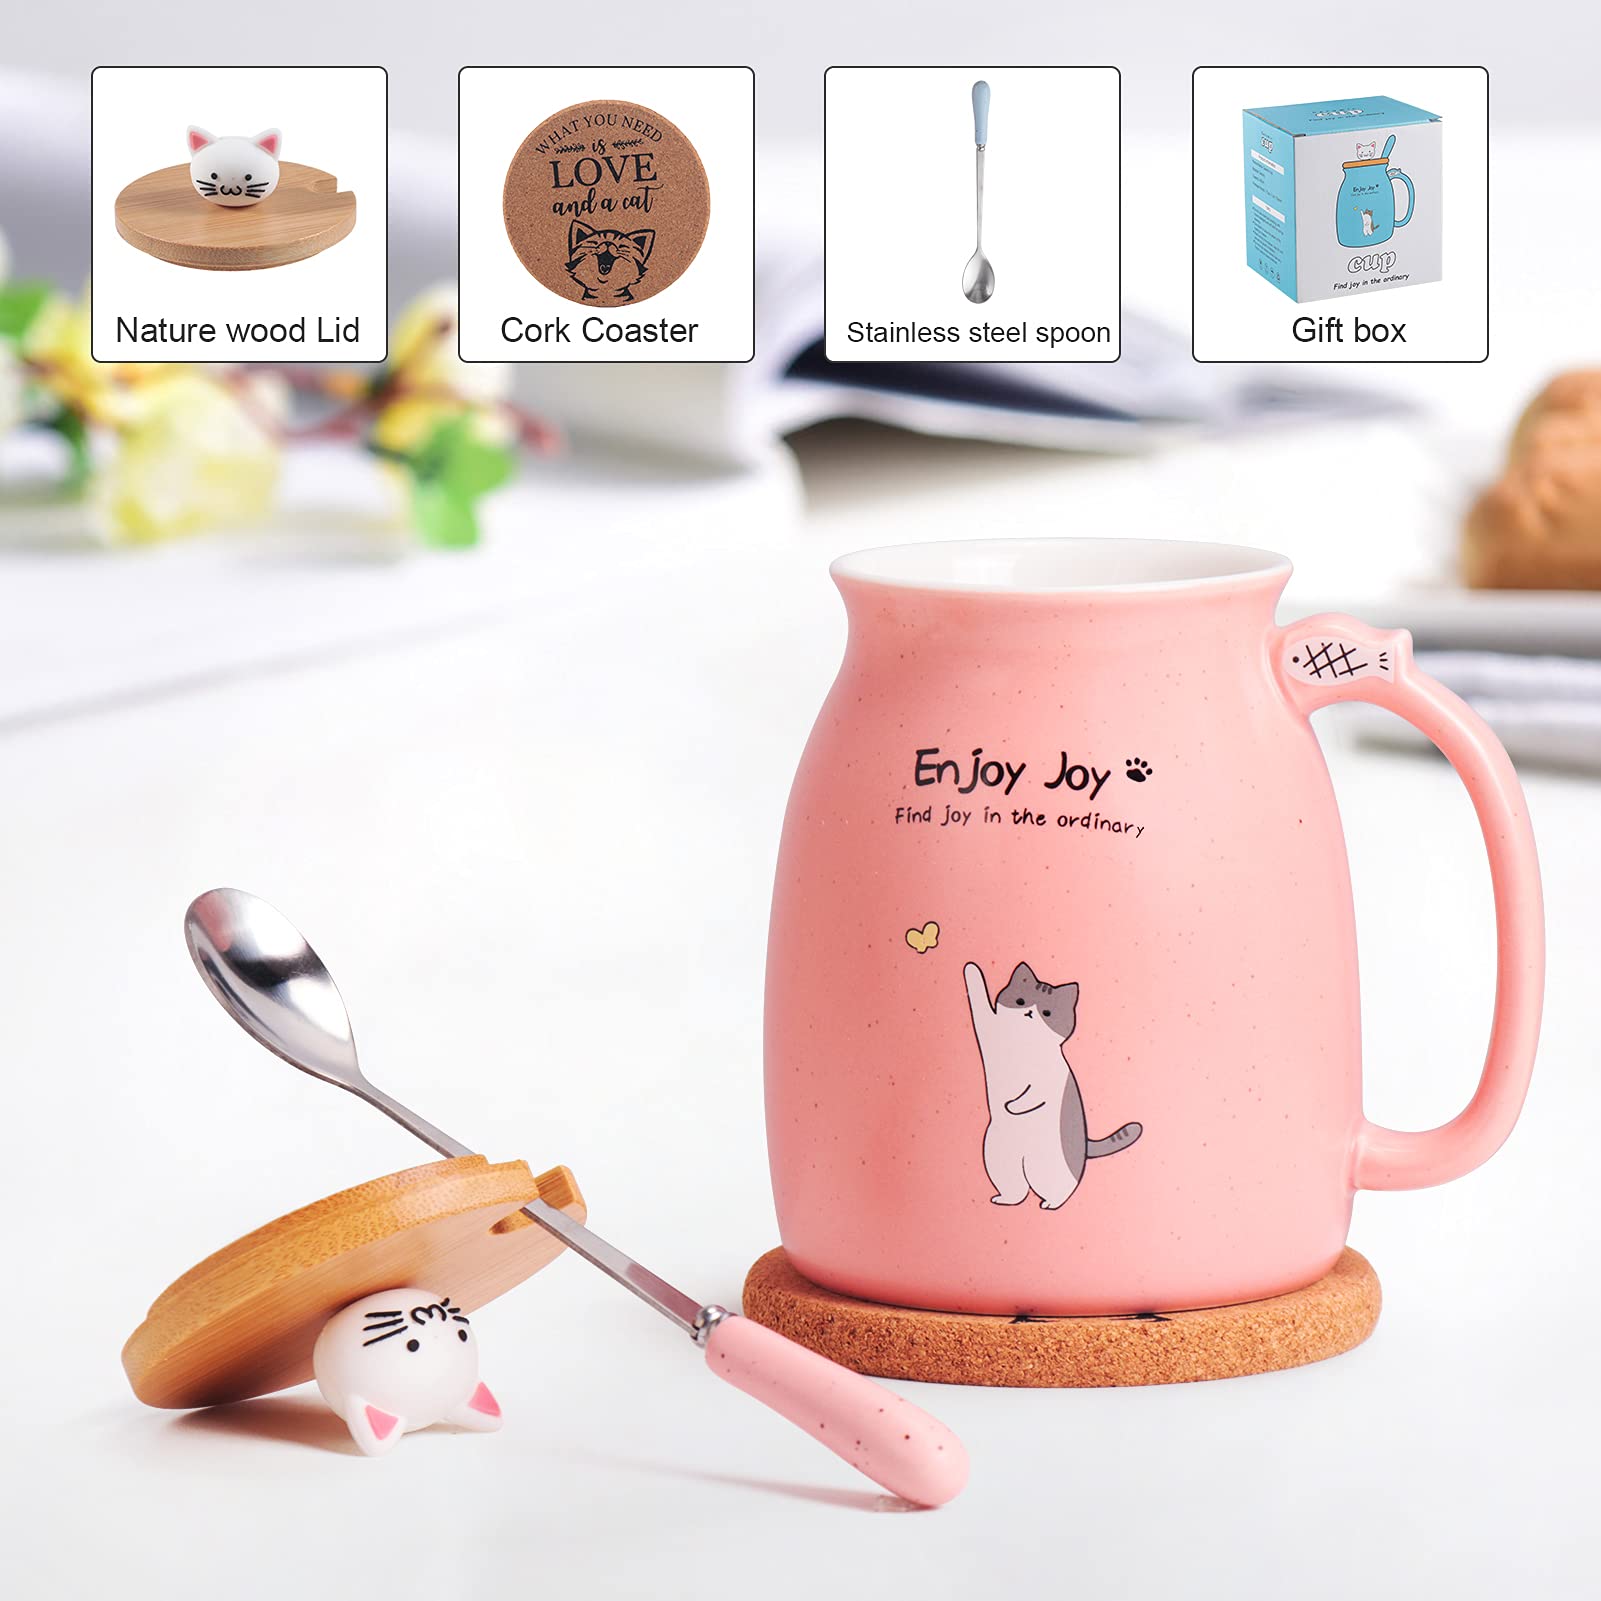 Feify Cute Cat Cup Ceramic Coffee Mug with Kawaii Cat Wooden Lid, Lovely Stainless Steel Spoon, Anime Kitty Thicken Wooden Coaster, Christmas Birthday Gift Cute Thing Japanese Mug 16oz (Pink)